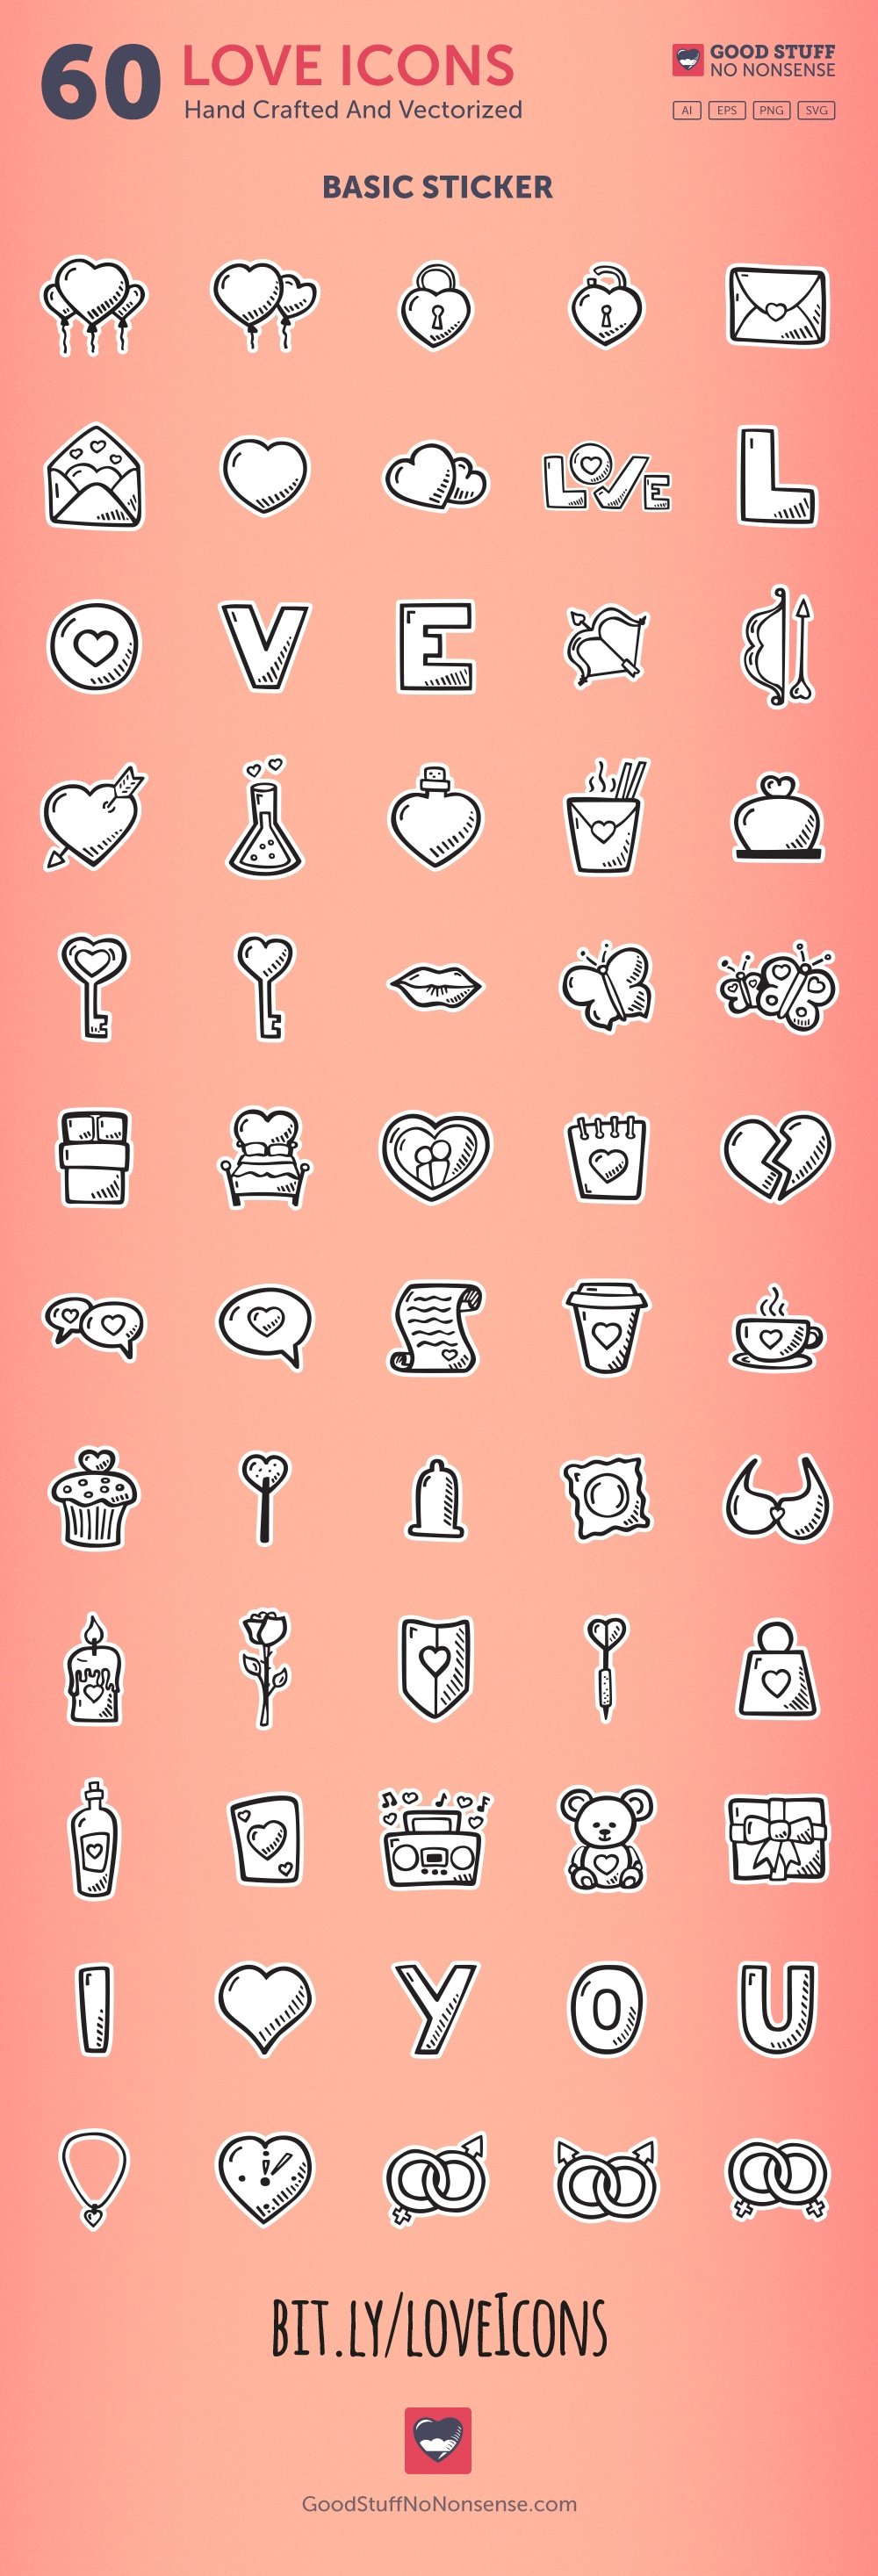 A set of 60 different basic sticker white-black hand drawn icons on a pink background.